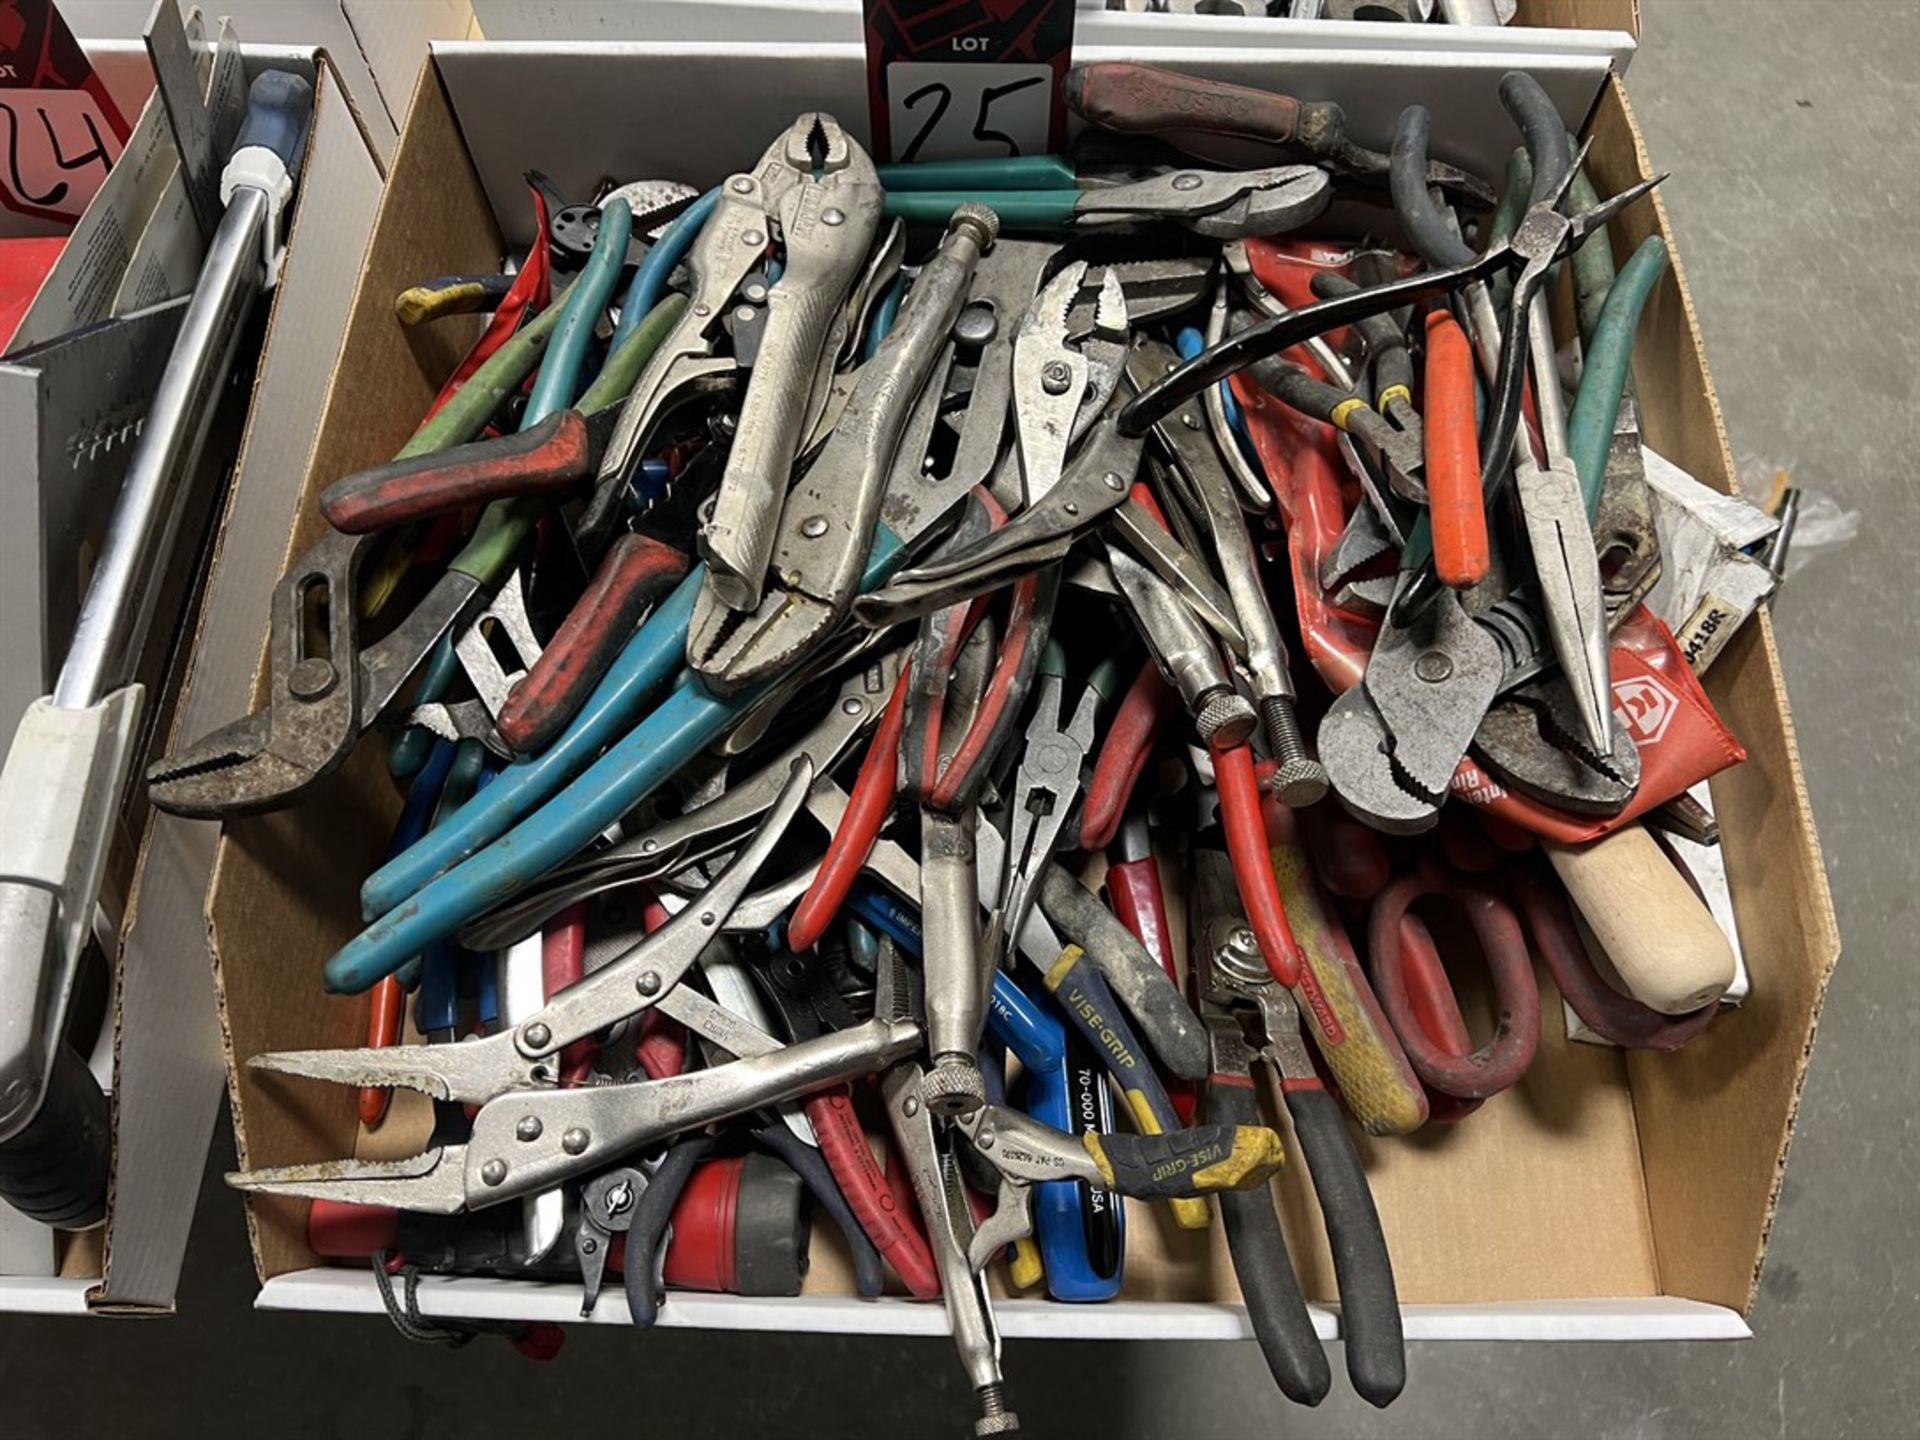 Lot of Assorted Vise Grips, Long Nose Pliers, Channel Locks, External Ring Pliers and Sheet Metal